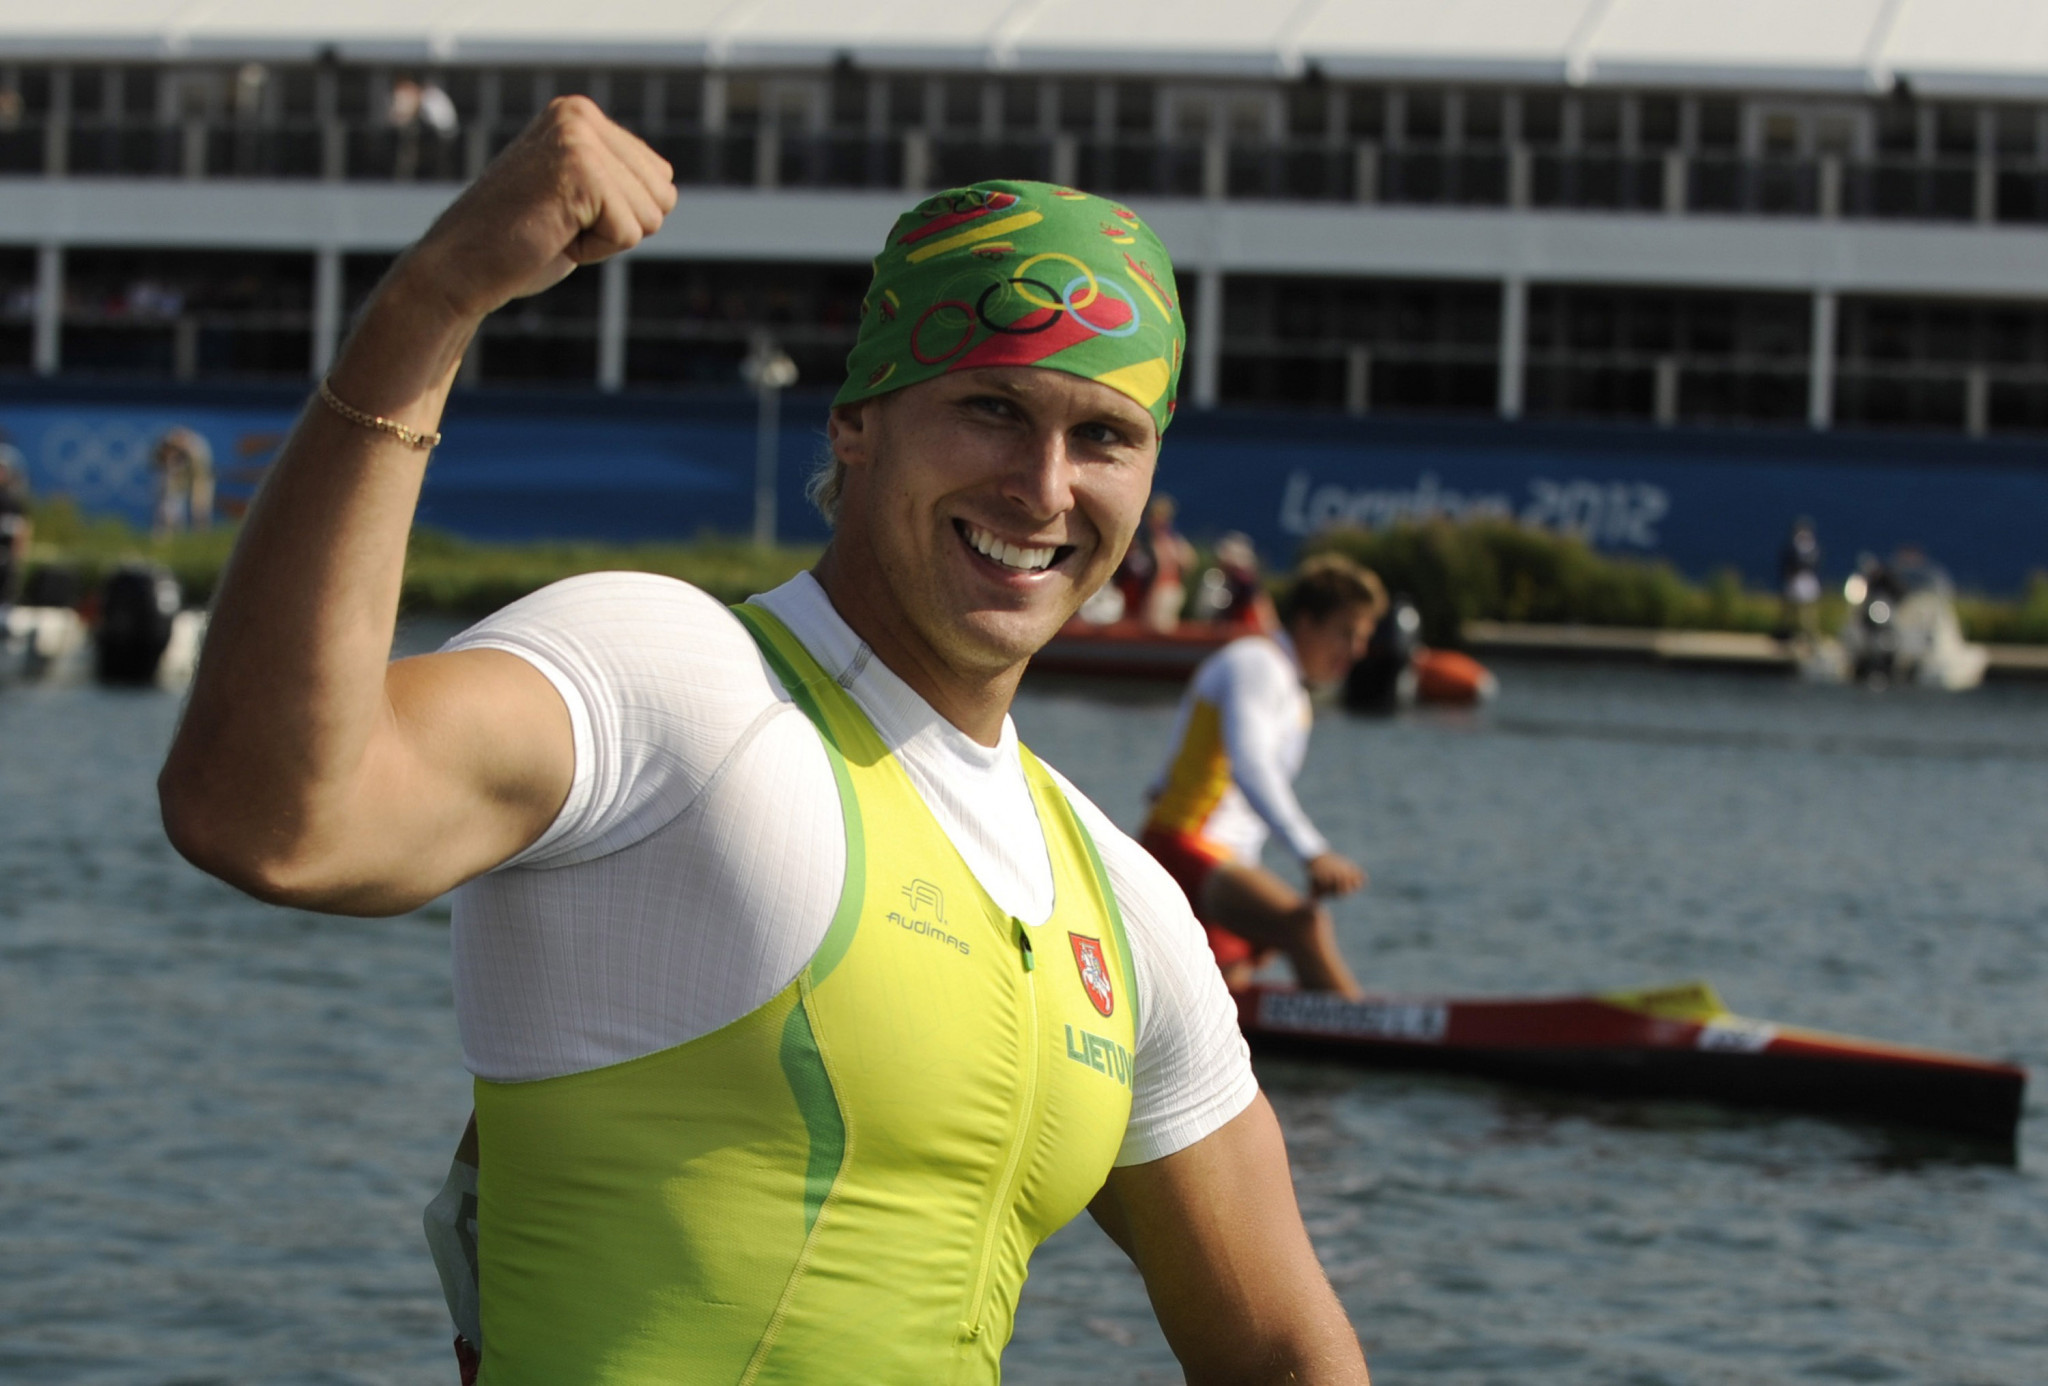 Lithuanian sprint canoeist Jevgenij Shuklin has been stripped of the Olympic silver medal he claimed at London 2012 after testing positive for a banned substance ©Getty Images